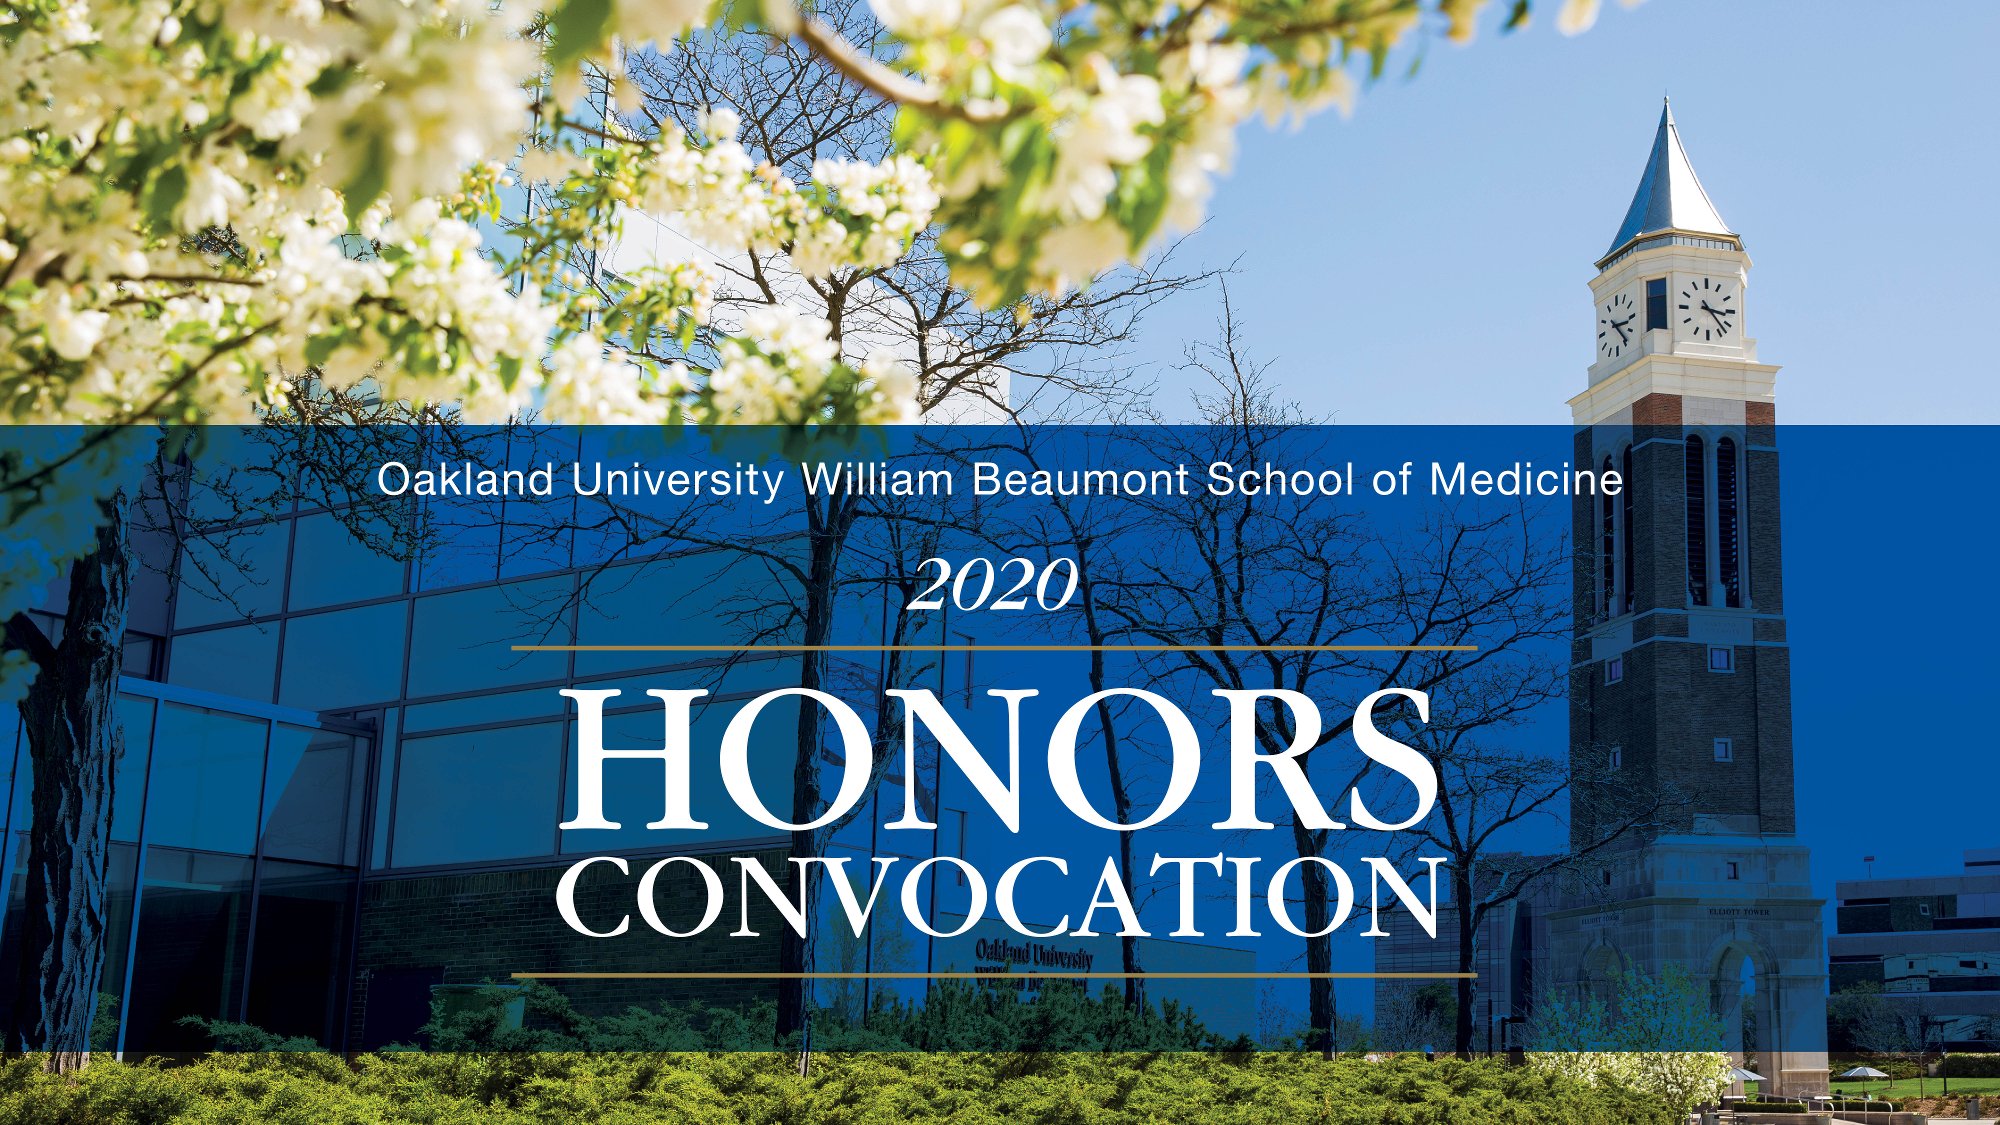 2020 Honors Convocation at OUWB offers different look, same significance